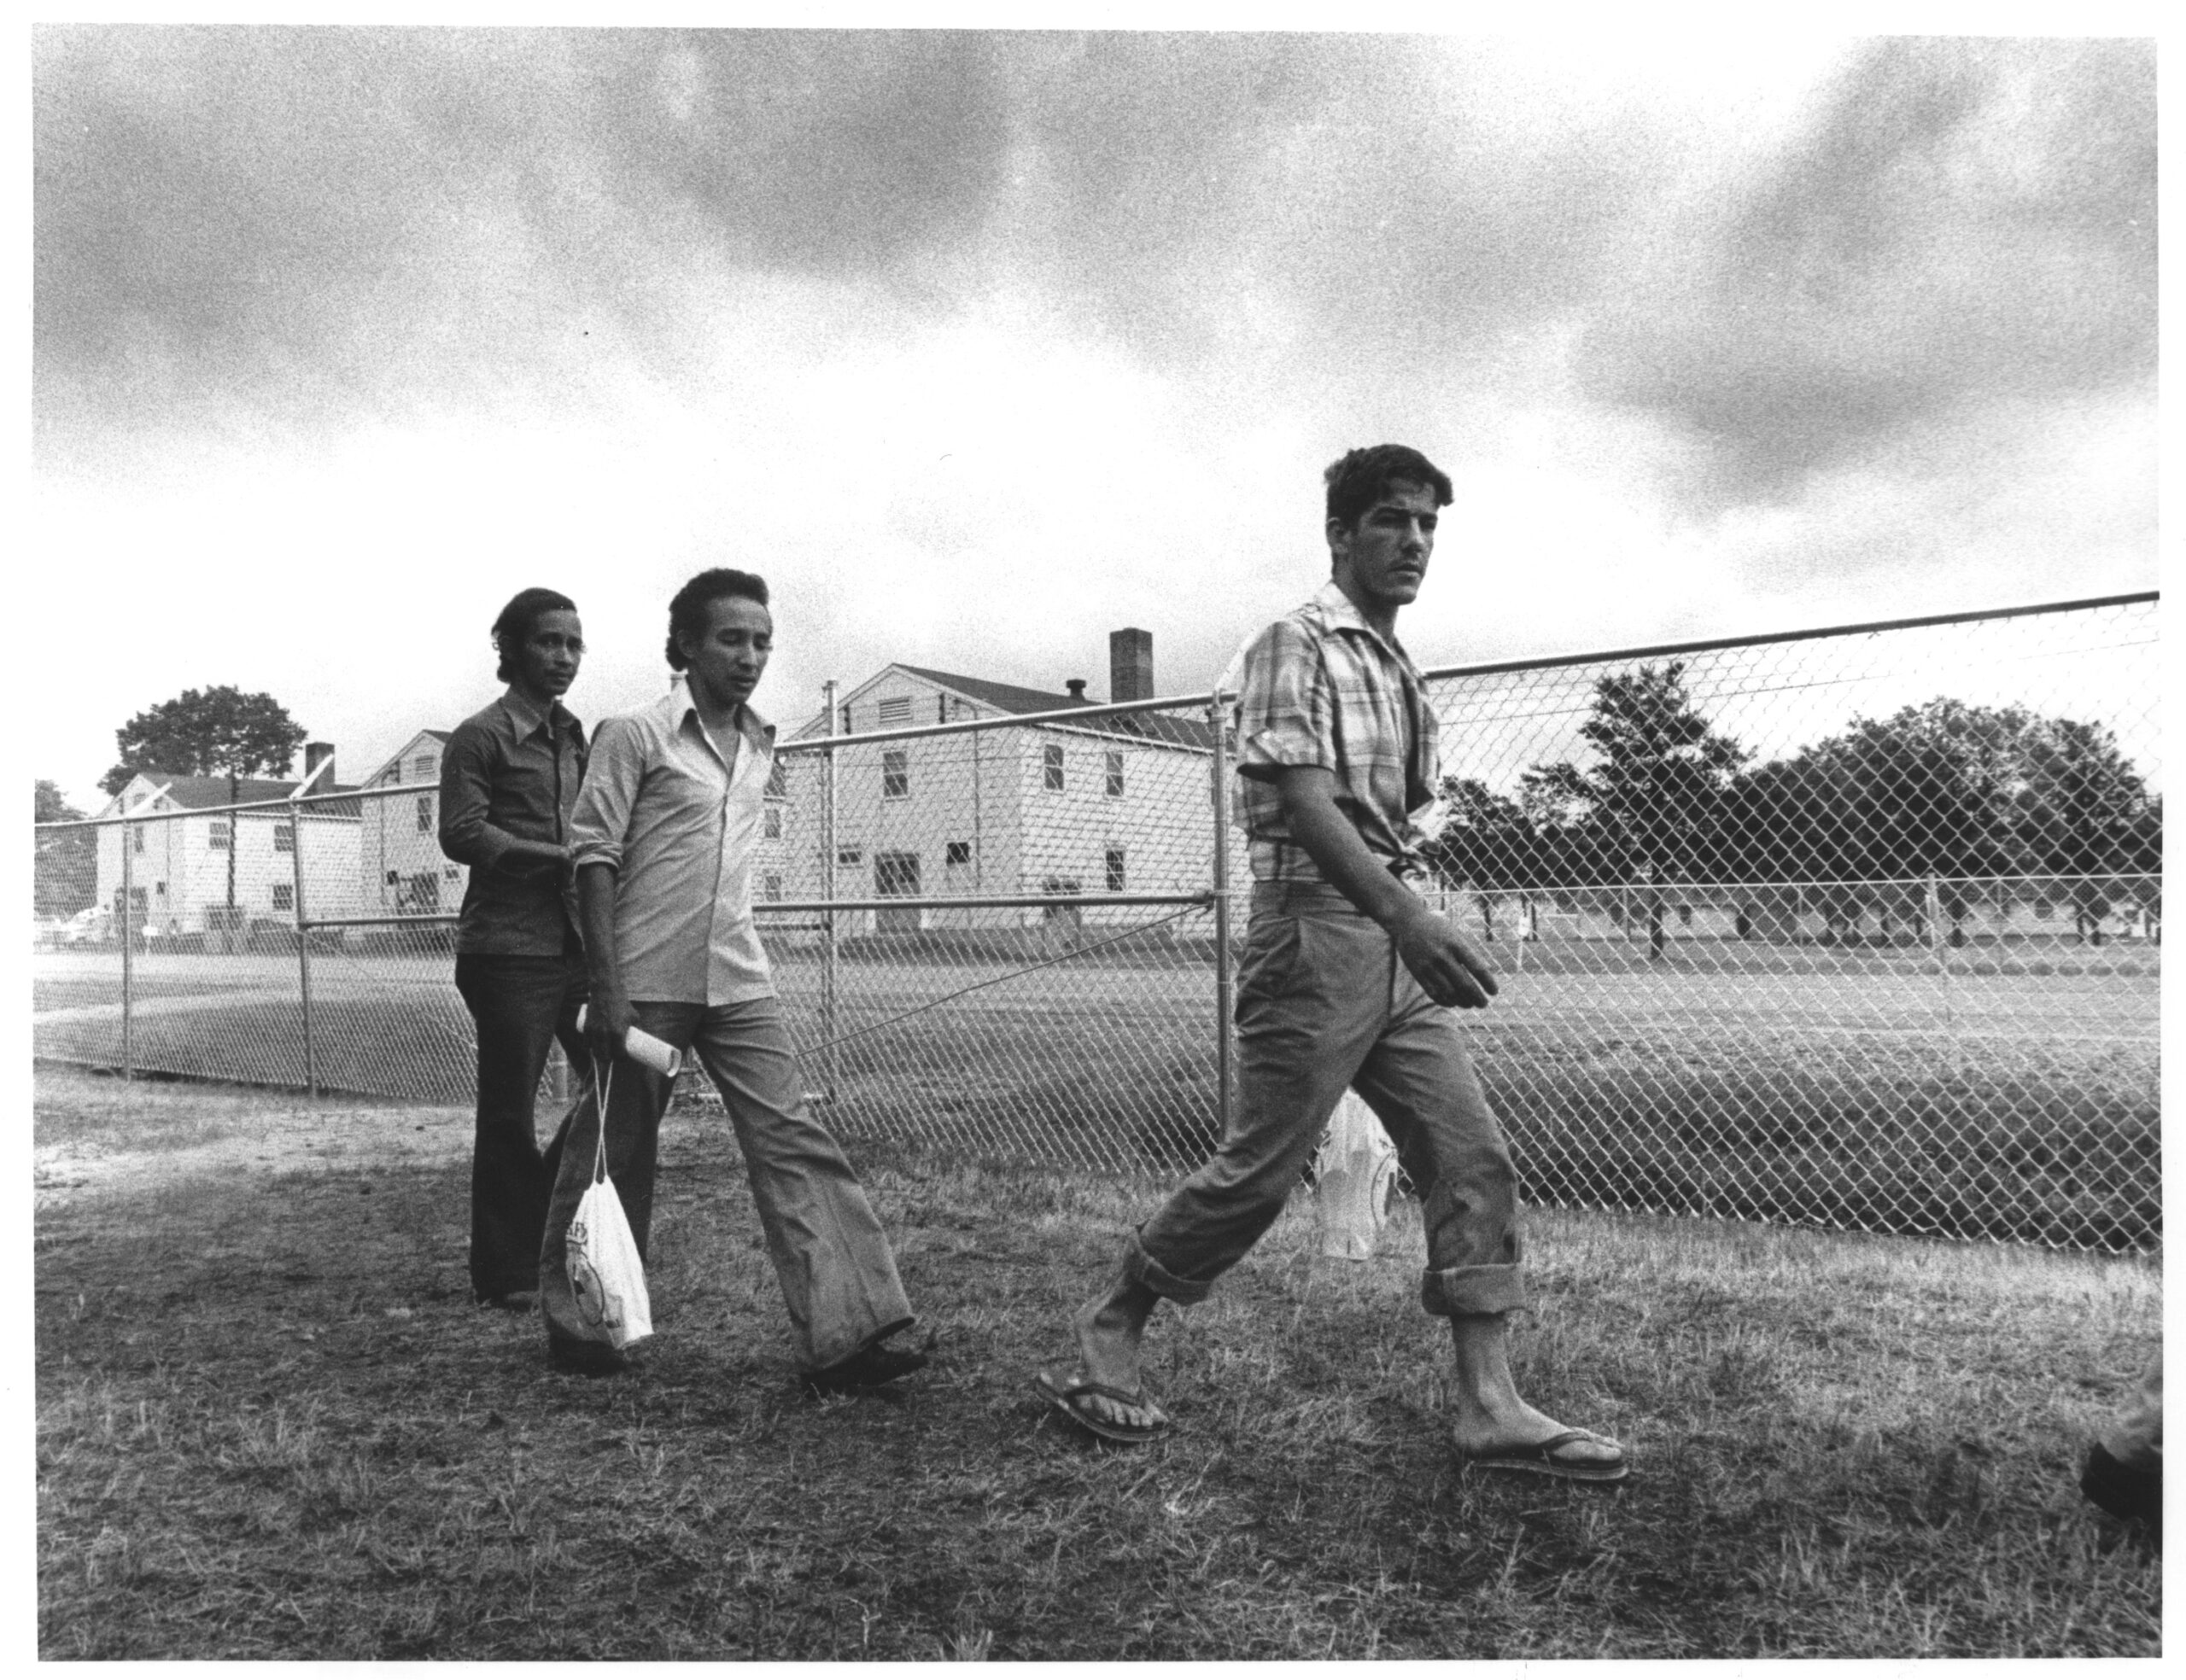 A black and white photograph featuring unidentified refugees walking along a fence